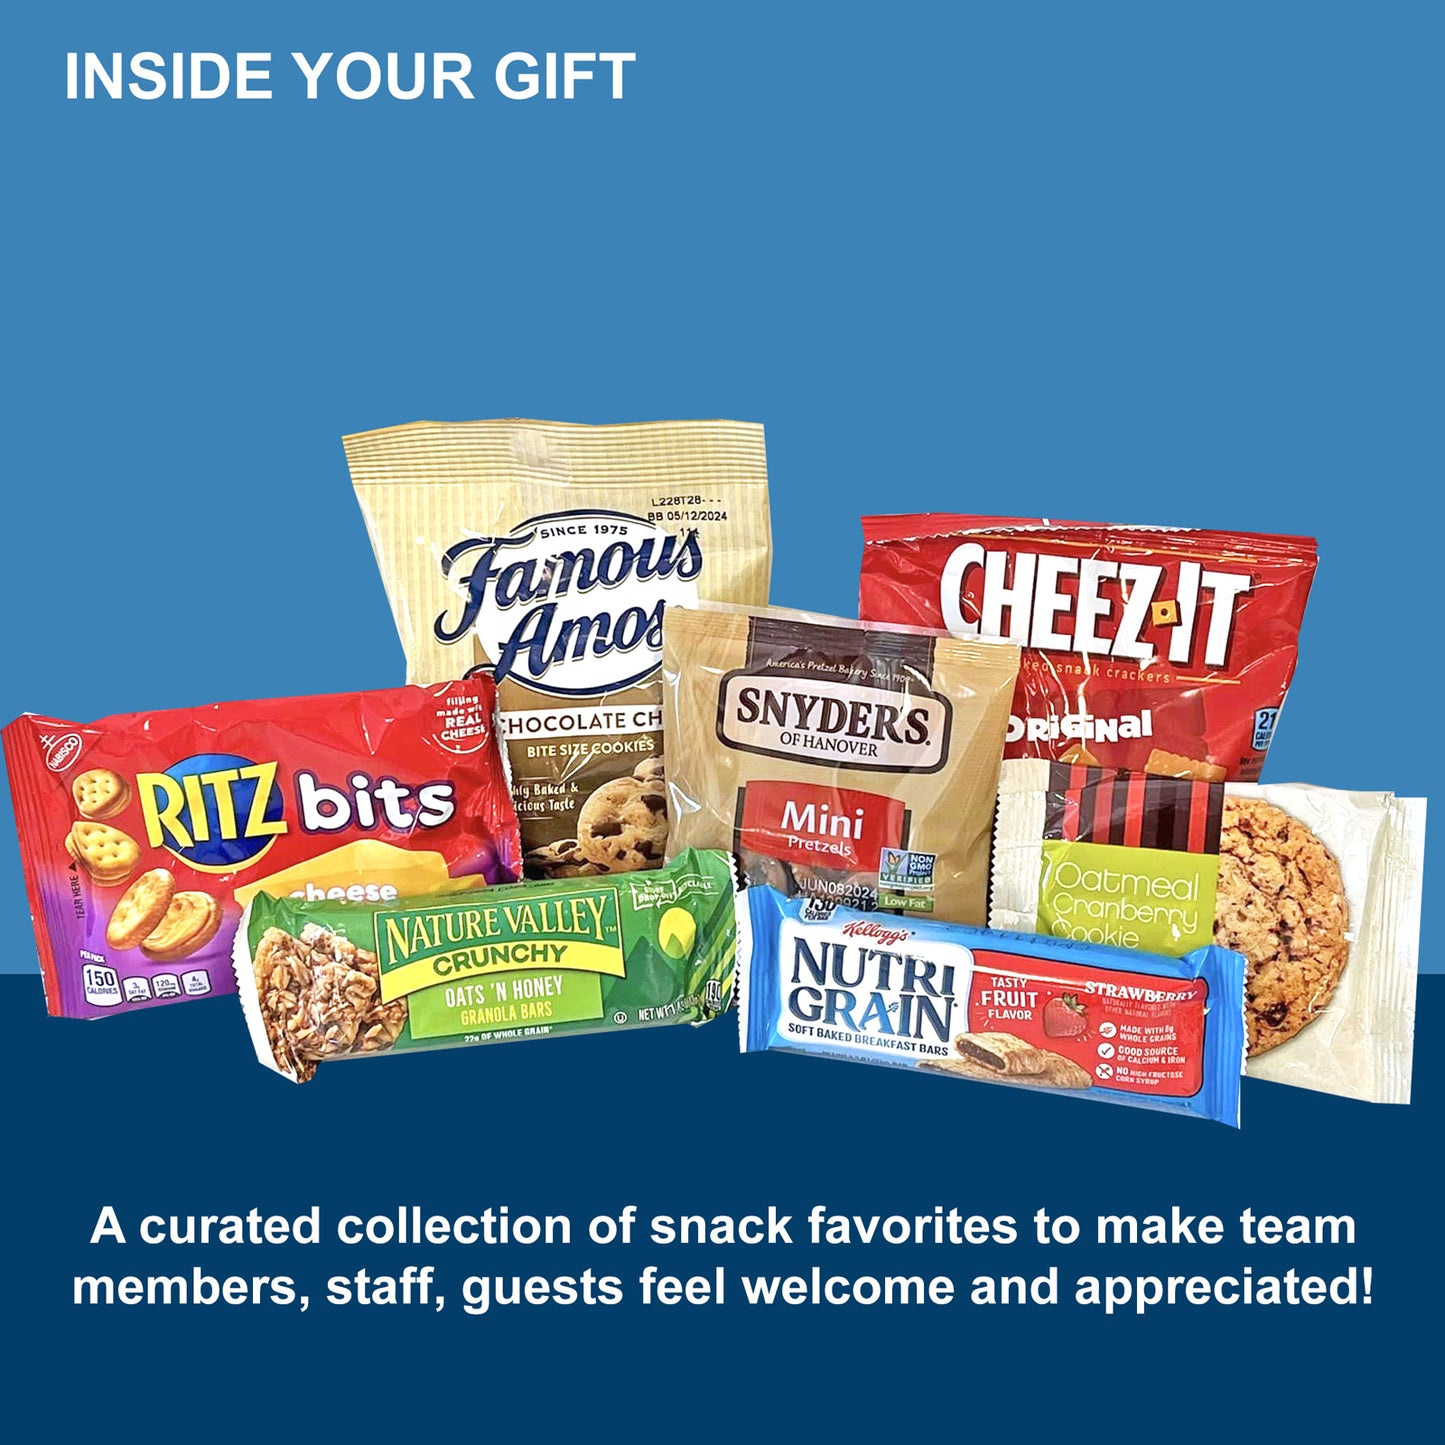 Snacks Welcome Gift Box for Meetings, Conferences, Trainings, Events Guest Gift with Cookies, Pretzels, Snacks for Attendees, Employees, Staff